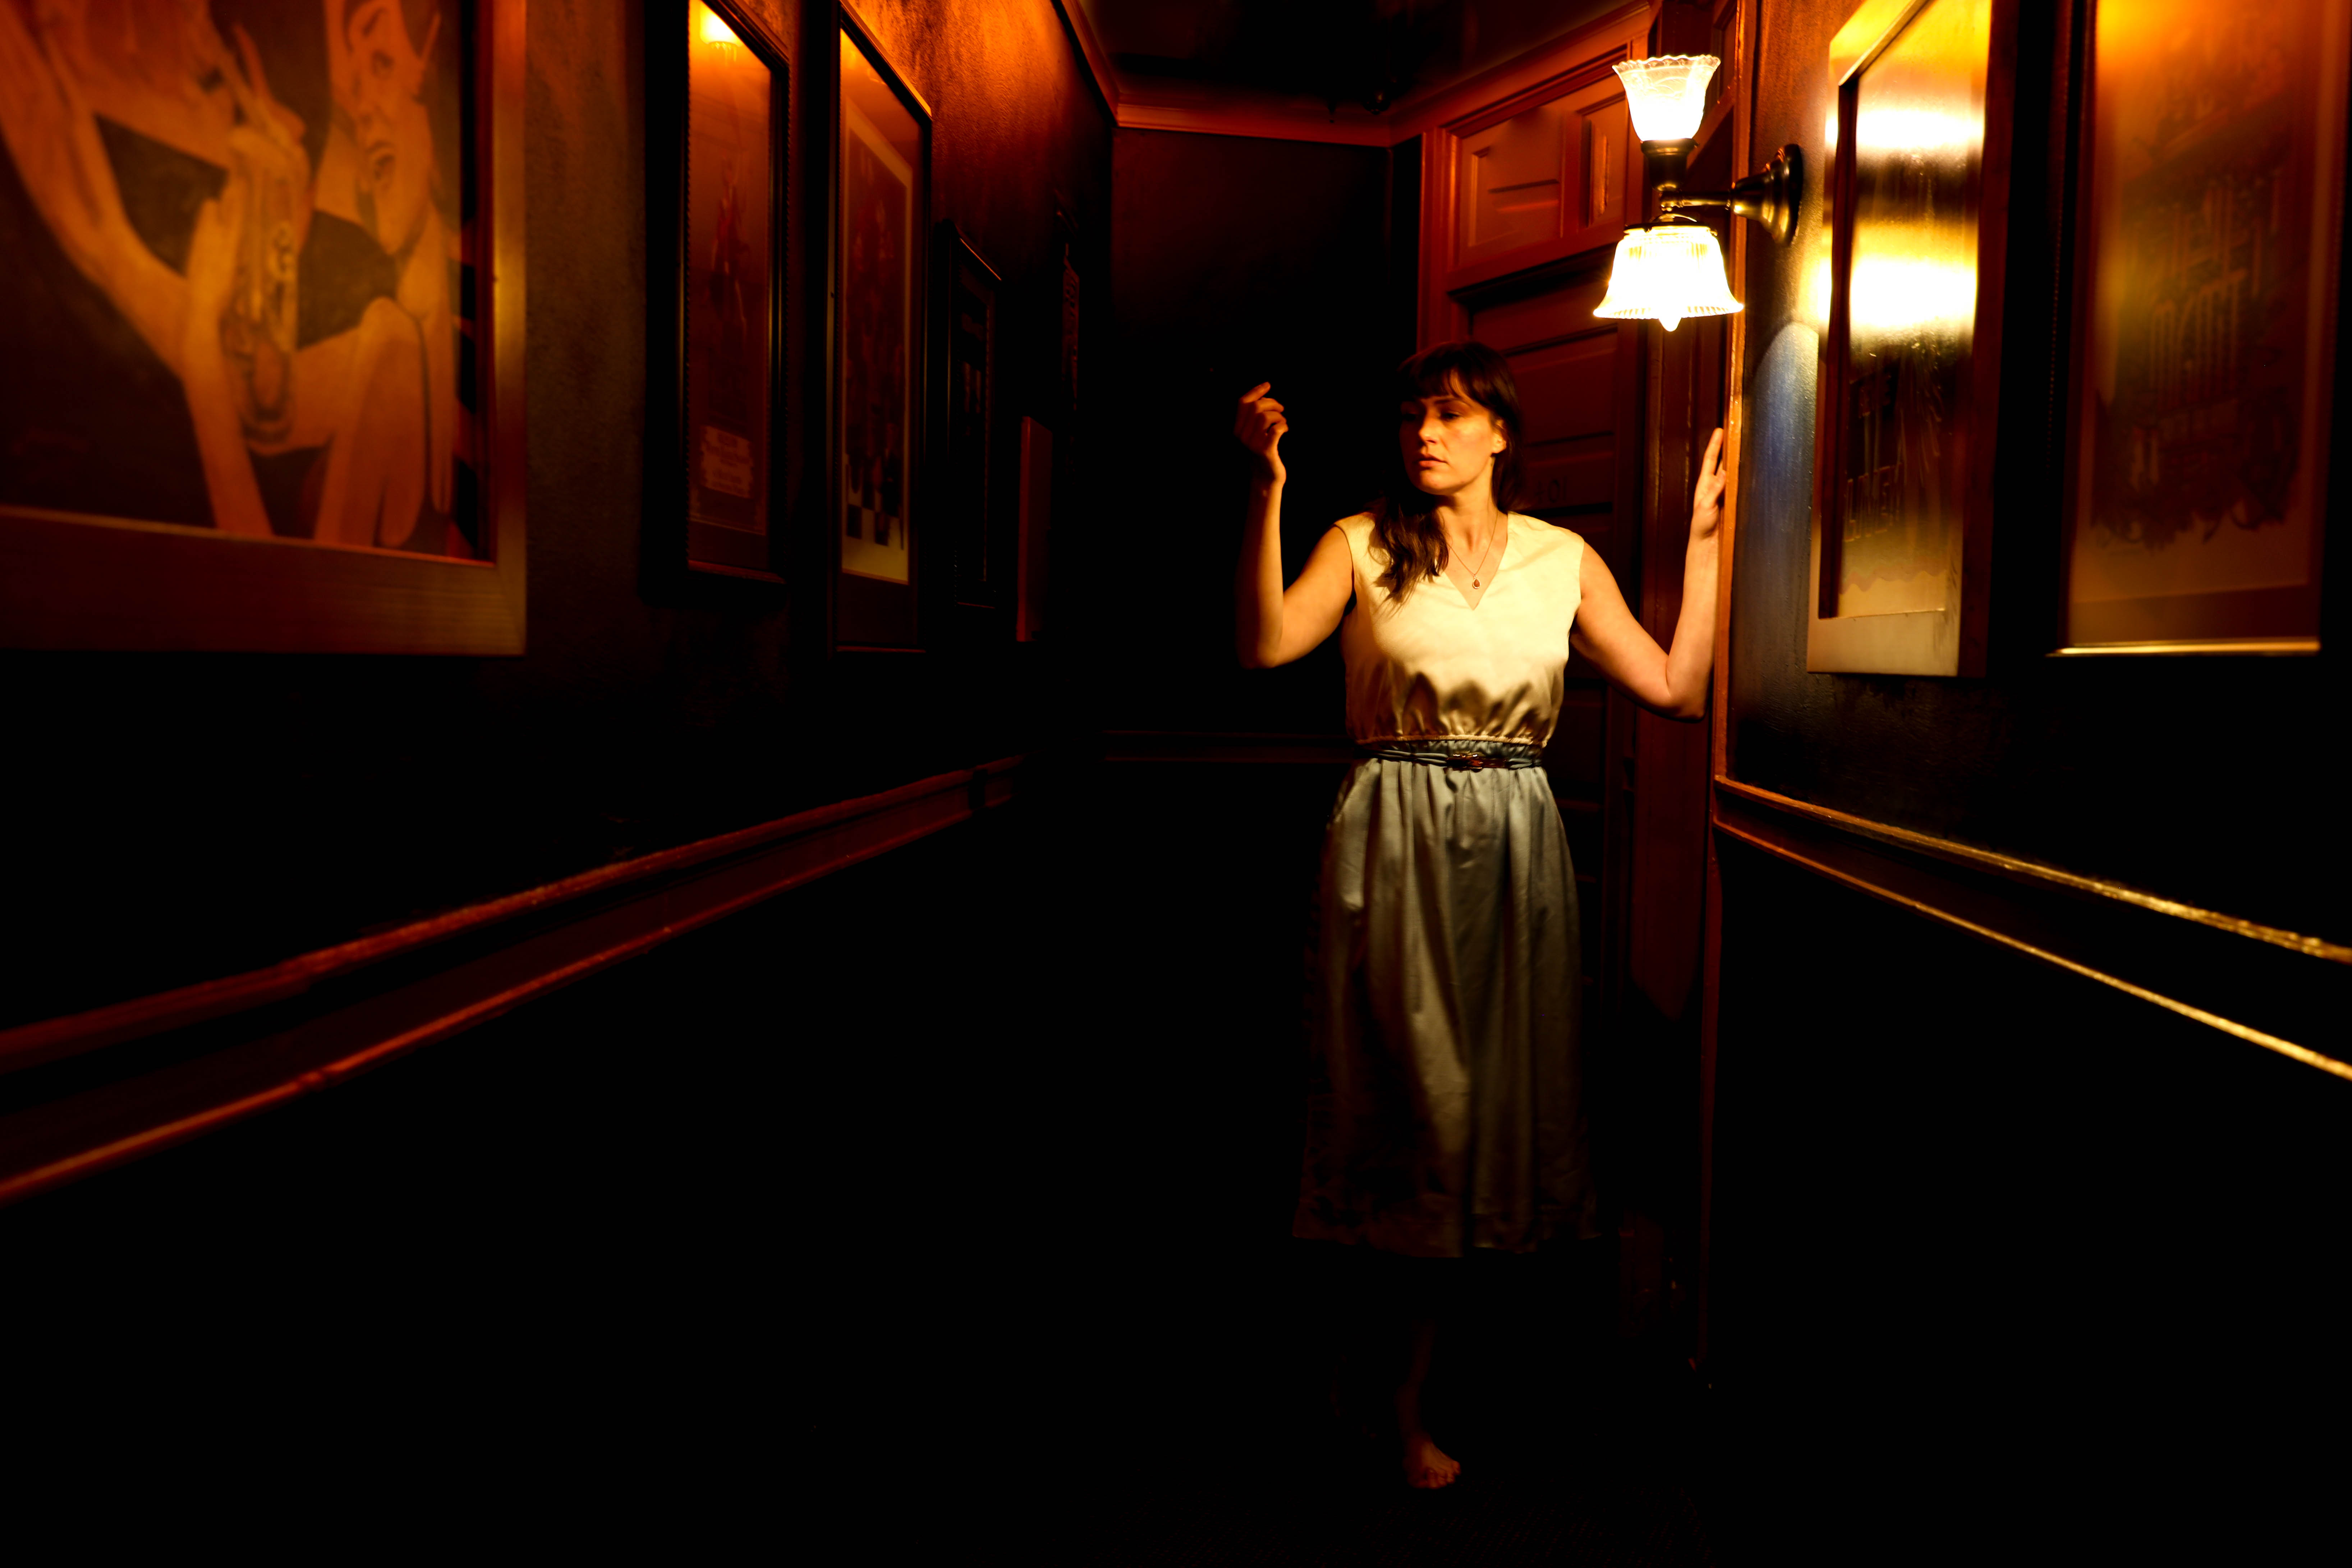 Stephanie Strange standing in a dark hallway with many framed
               pictures on the wall, holding one arm up to look at her hand, wearing
               a white and blue full length dress